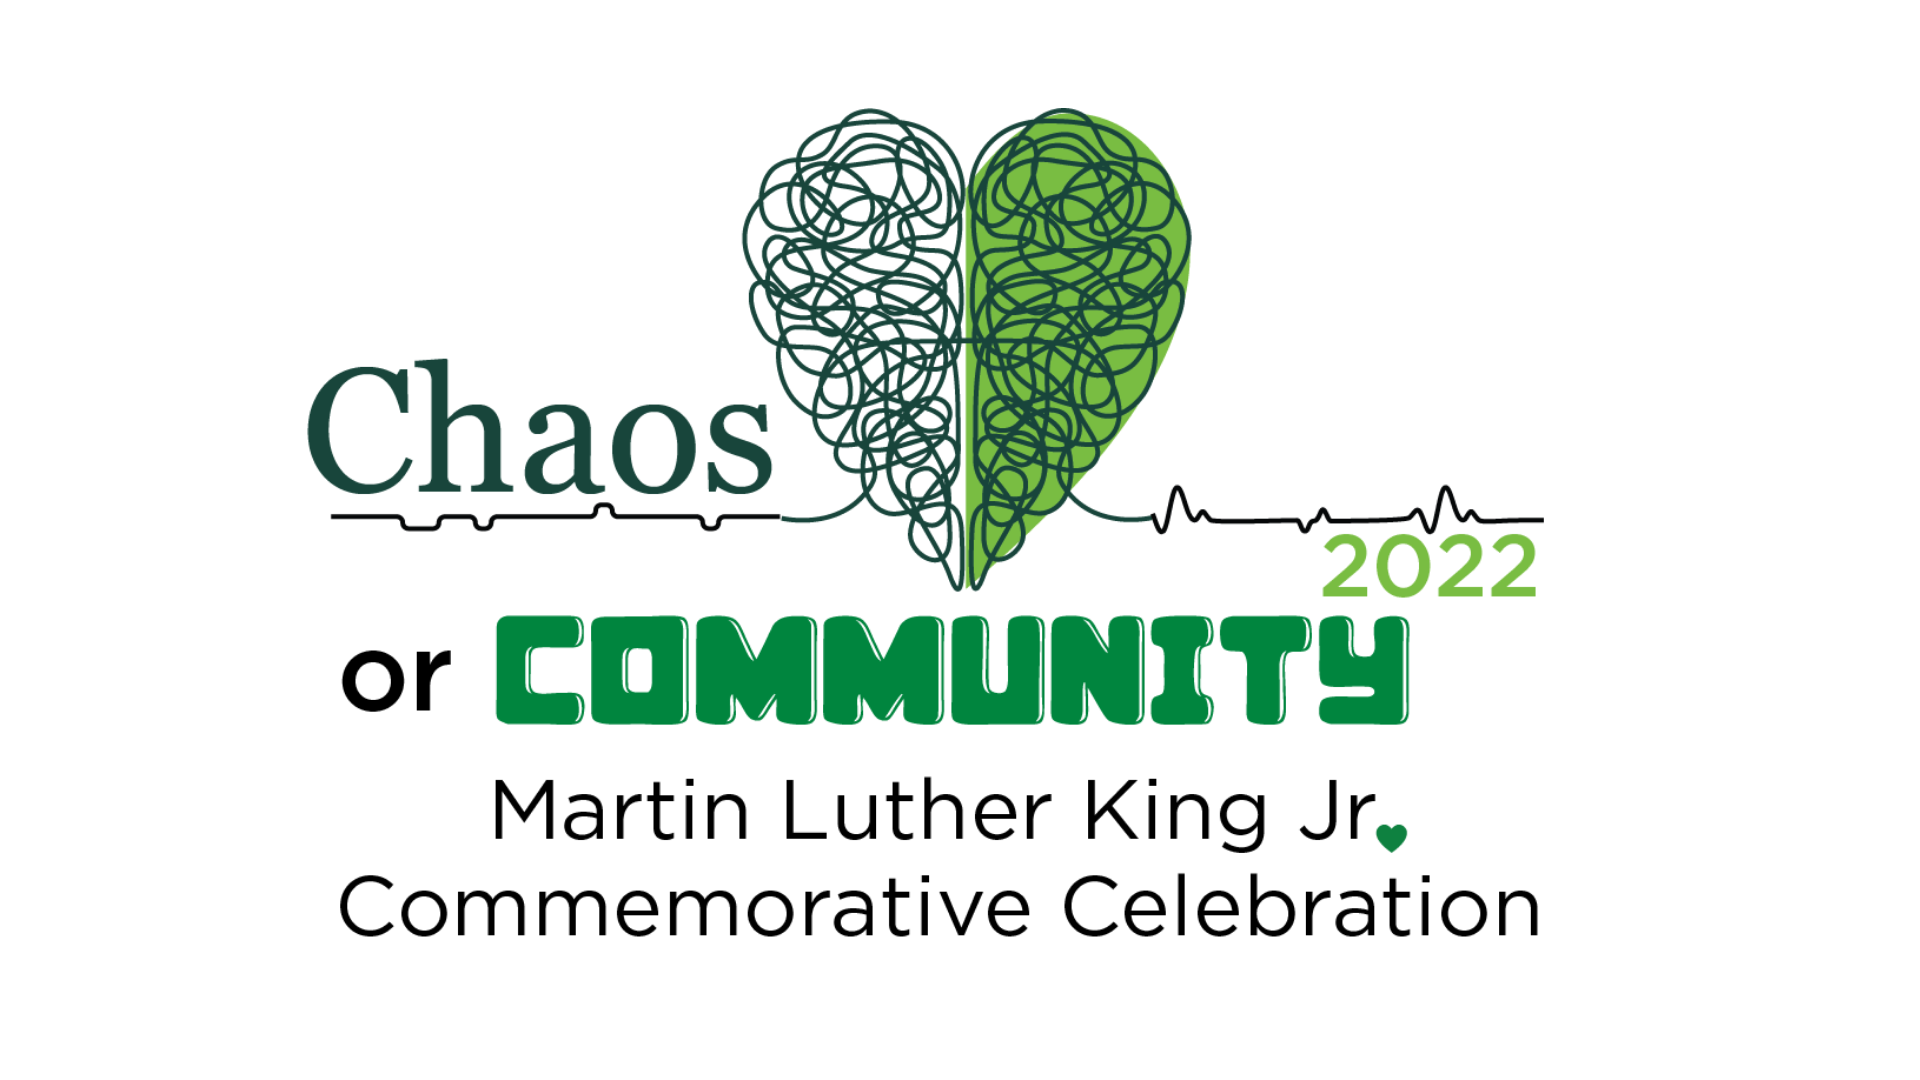 Chaos or Community: 2022 Martin Luther King Jr. Commemorative Celebration